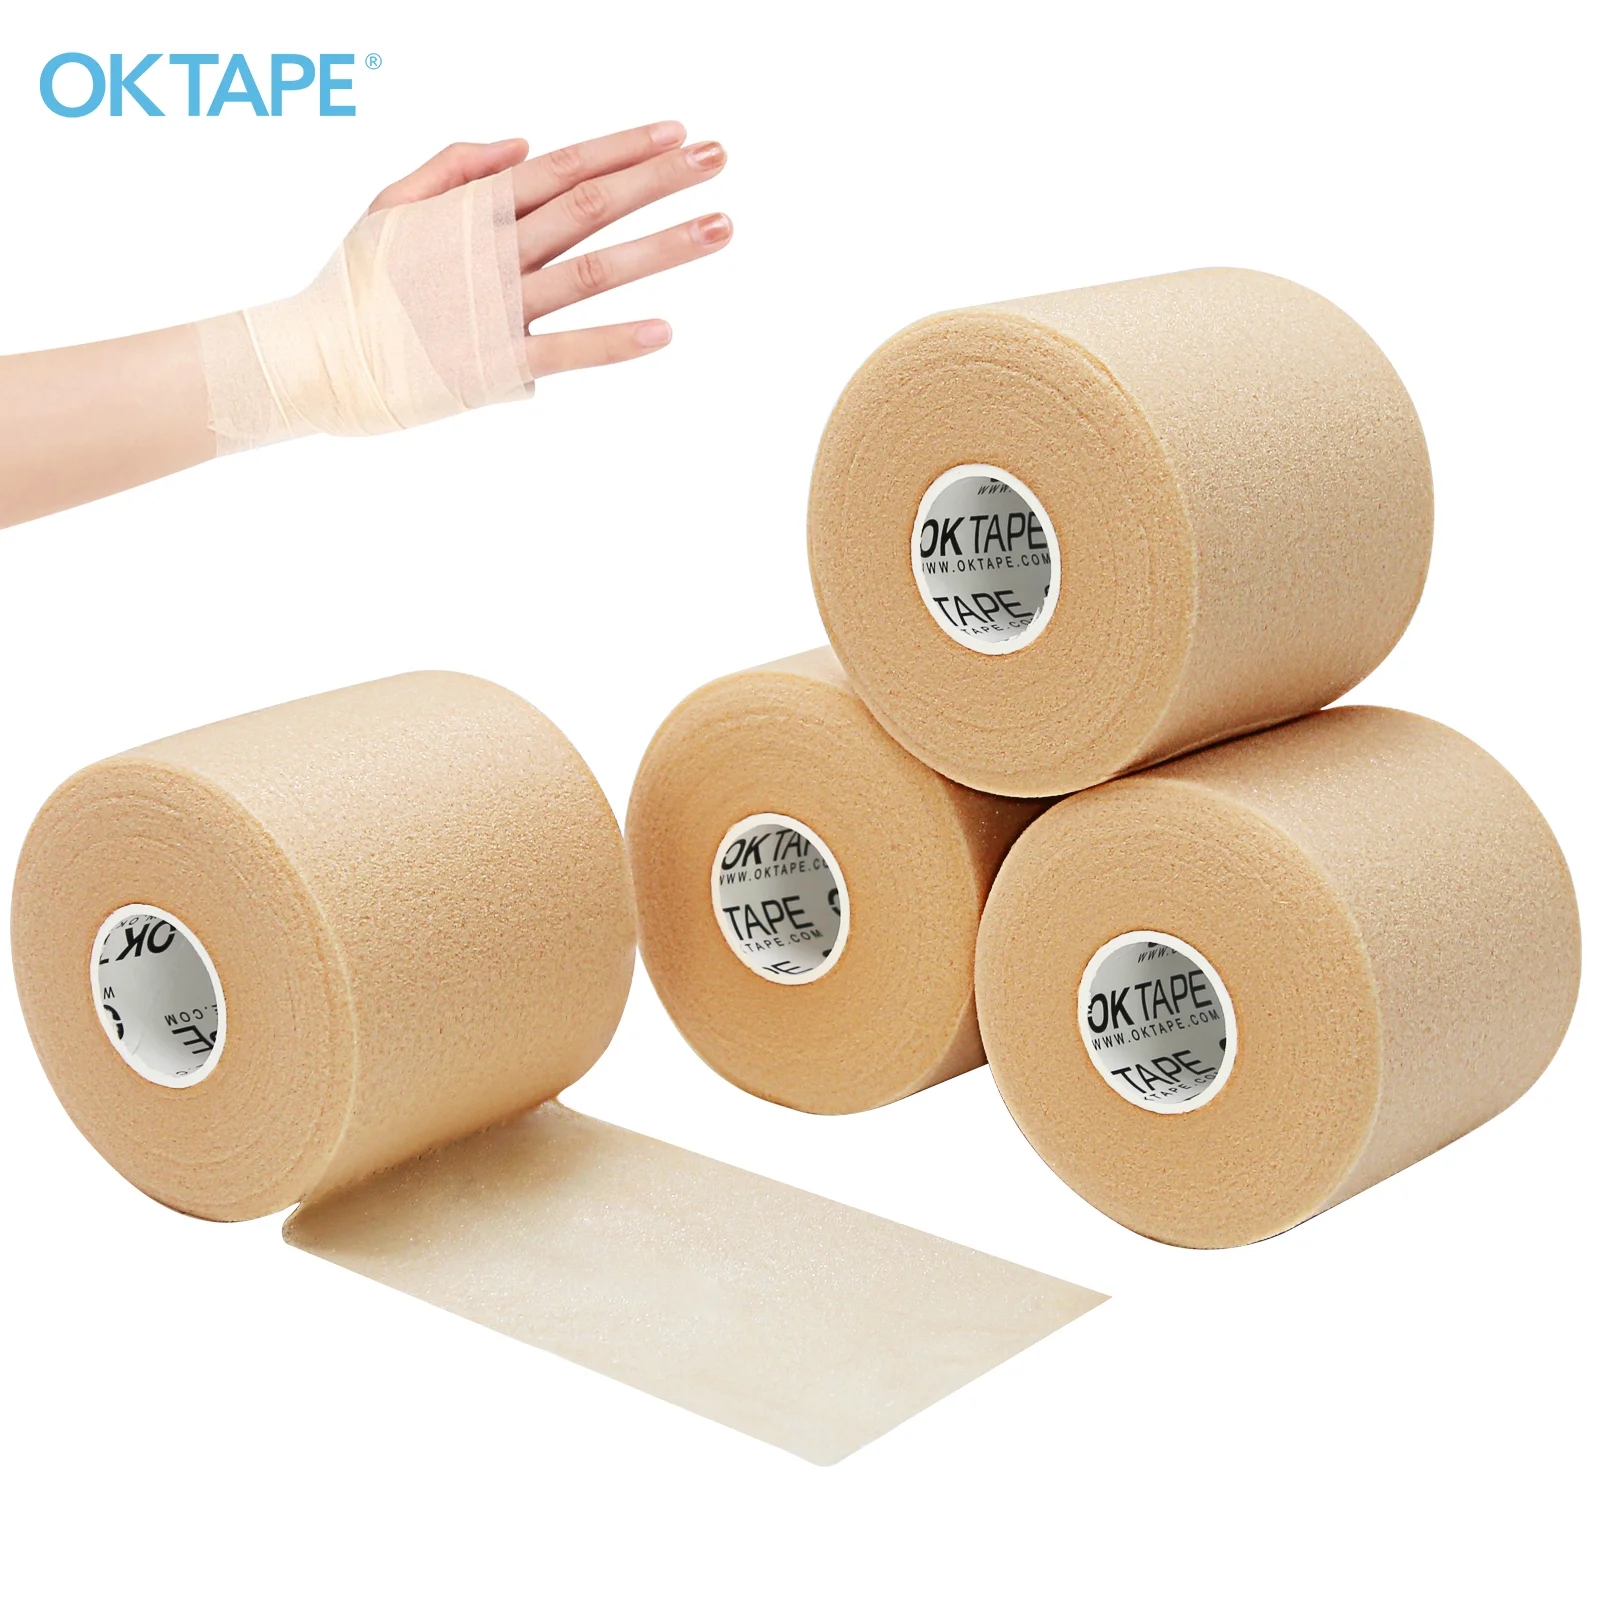 

OK TAPE Pre Wrap Tape 4-Rolls Athletic Foam Underwrap for Sports, Protect Ankles Wrists Hands and Knees, 7 CM x 27 M Pink Skin